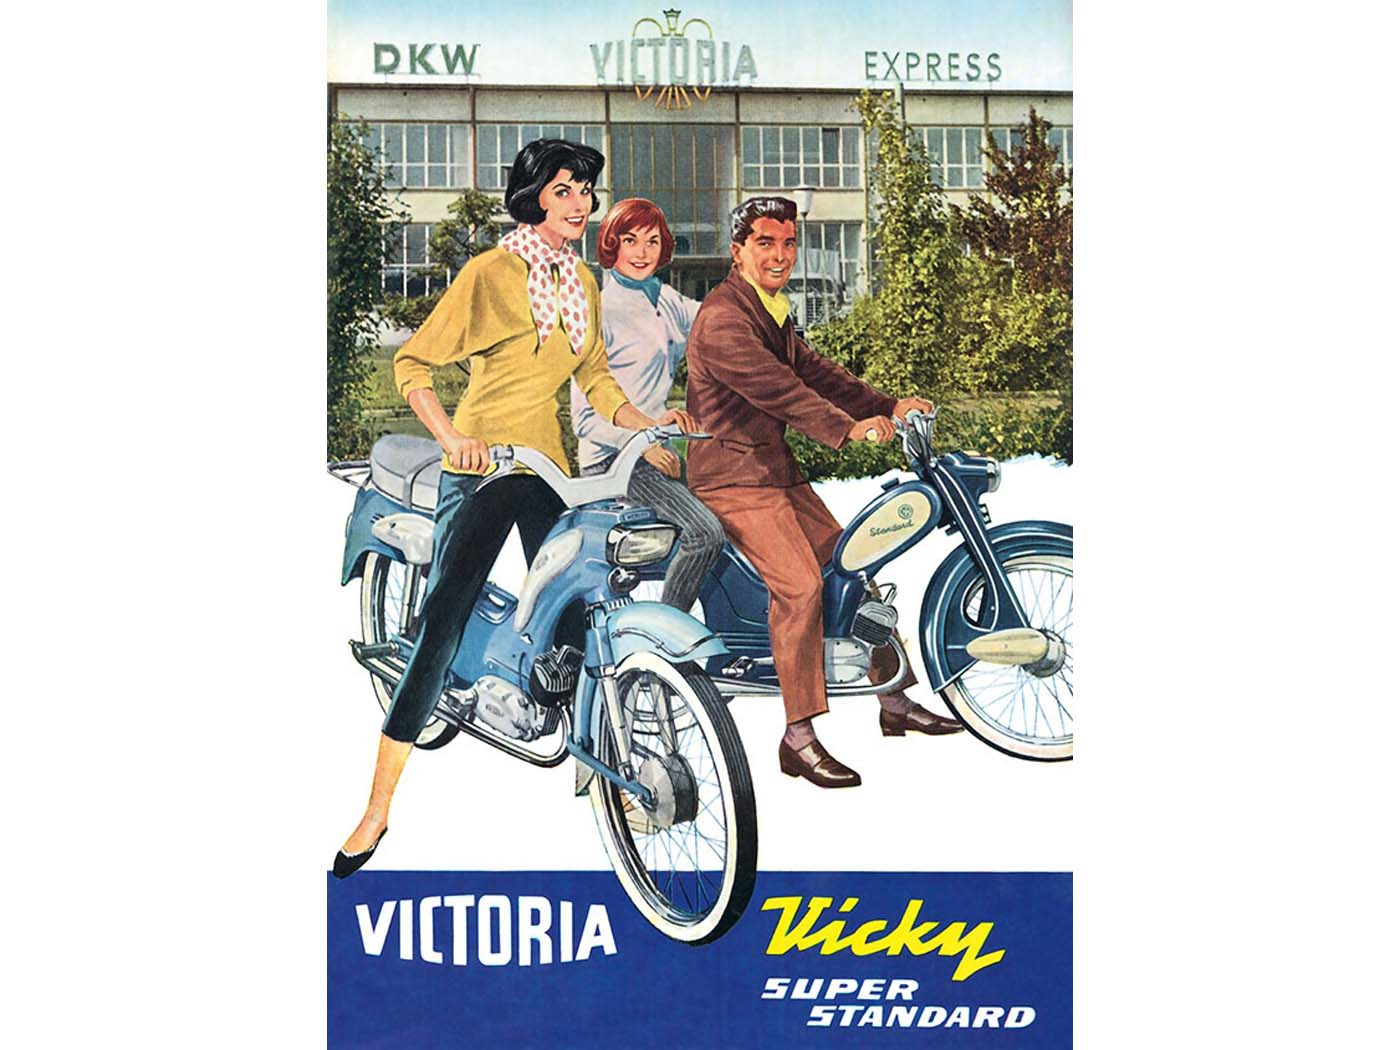 Advertising Poster Reprint 42cm 29cm For Victoria (DKW Express), Vicky Standard, Super Luxus